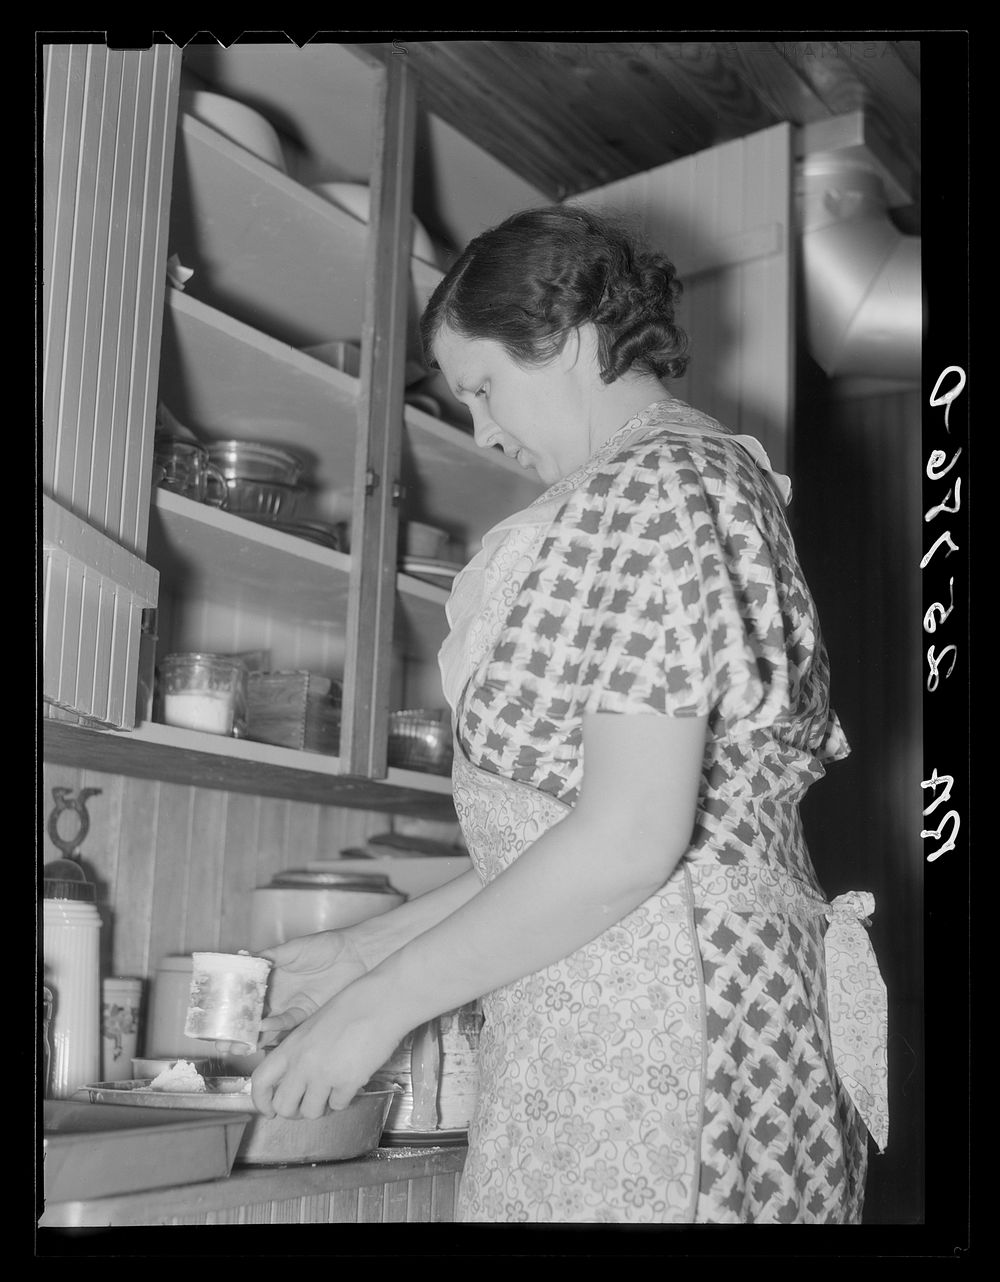 Mrs. McNally baking a cake for dinner. Kirby, Vermont. Sourced from the Library of Congress.